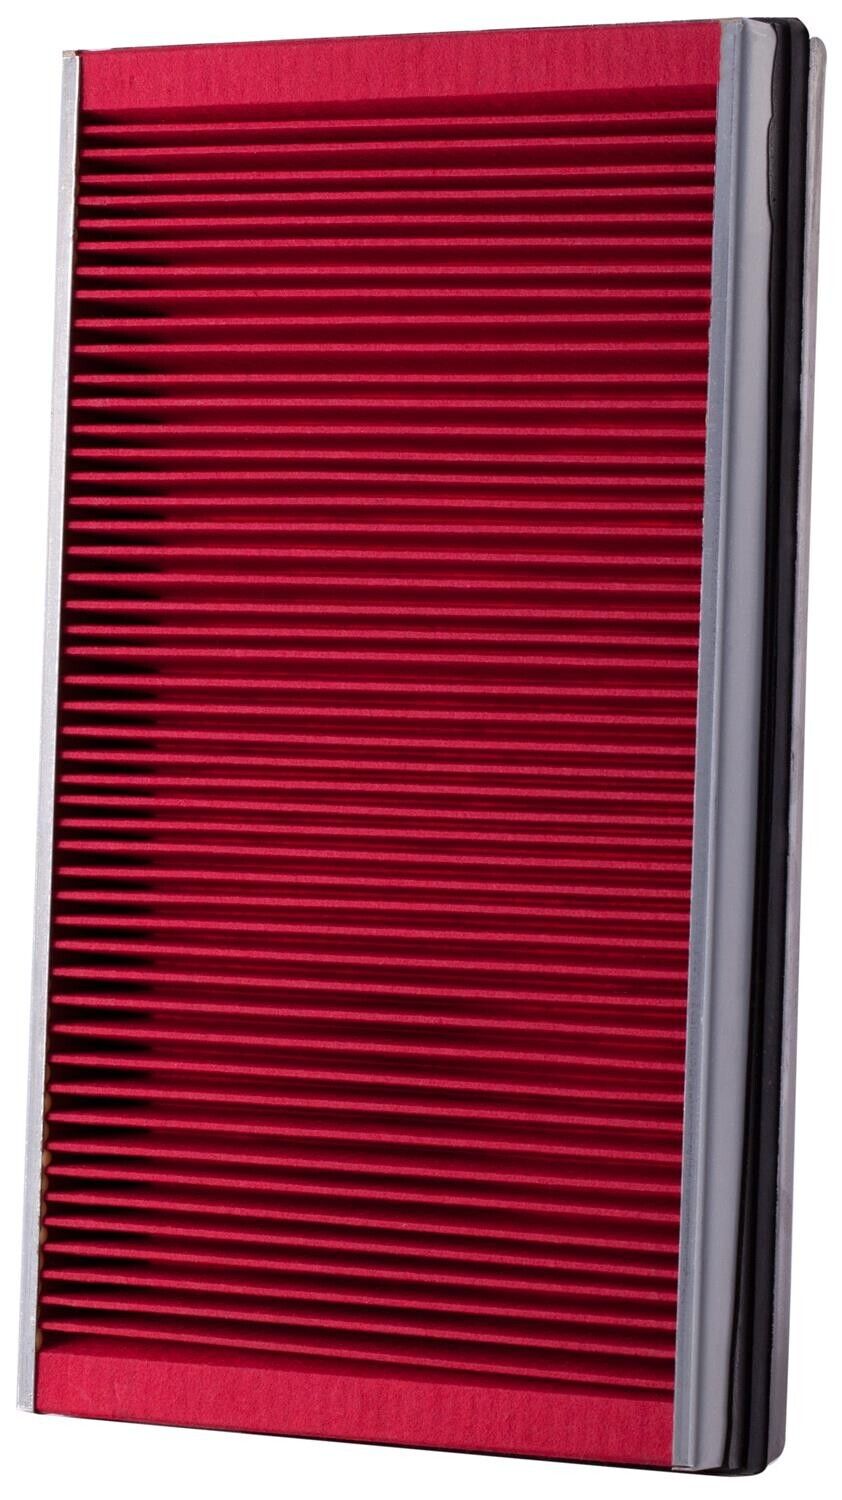 Air Filter for Loyale, XT, Stanza, DL, GL, GL-10, RX, 200SX, Maxima+More PA70